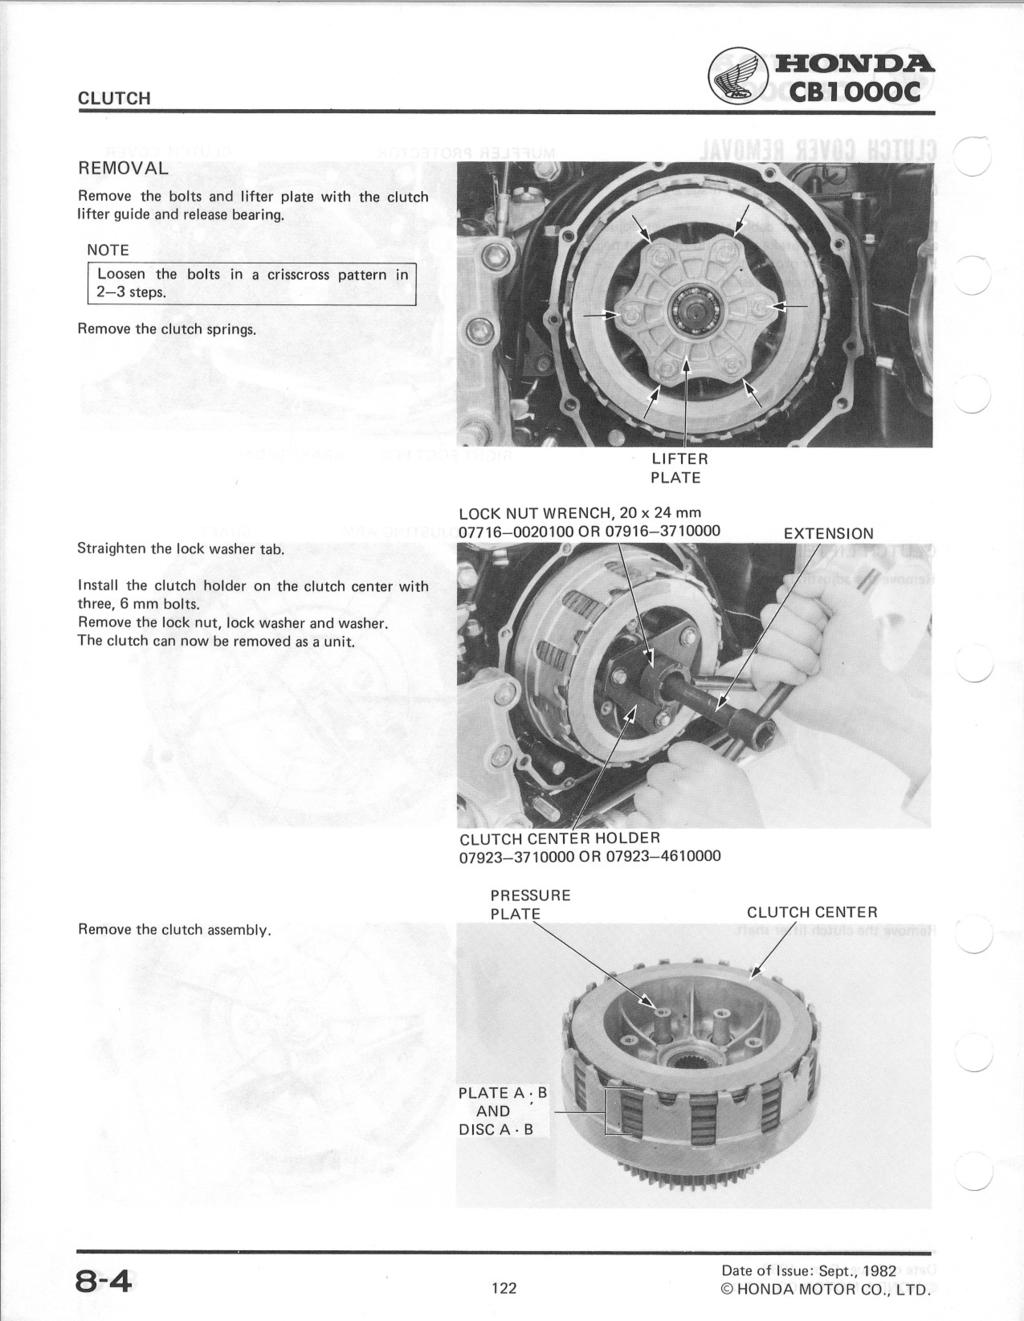 ~:H:OIV:D.A. ~ CB1000C REMOVAL Remove the bolts and lifter plate with the clutch lifter guide and release bearing. NOTE Loosen the bolts in a crisscross pattern in 2-3 steps.